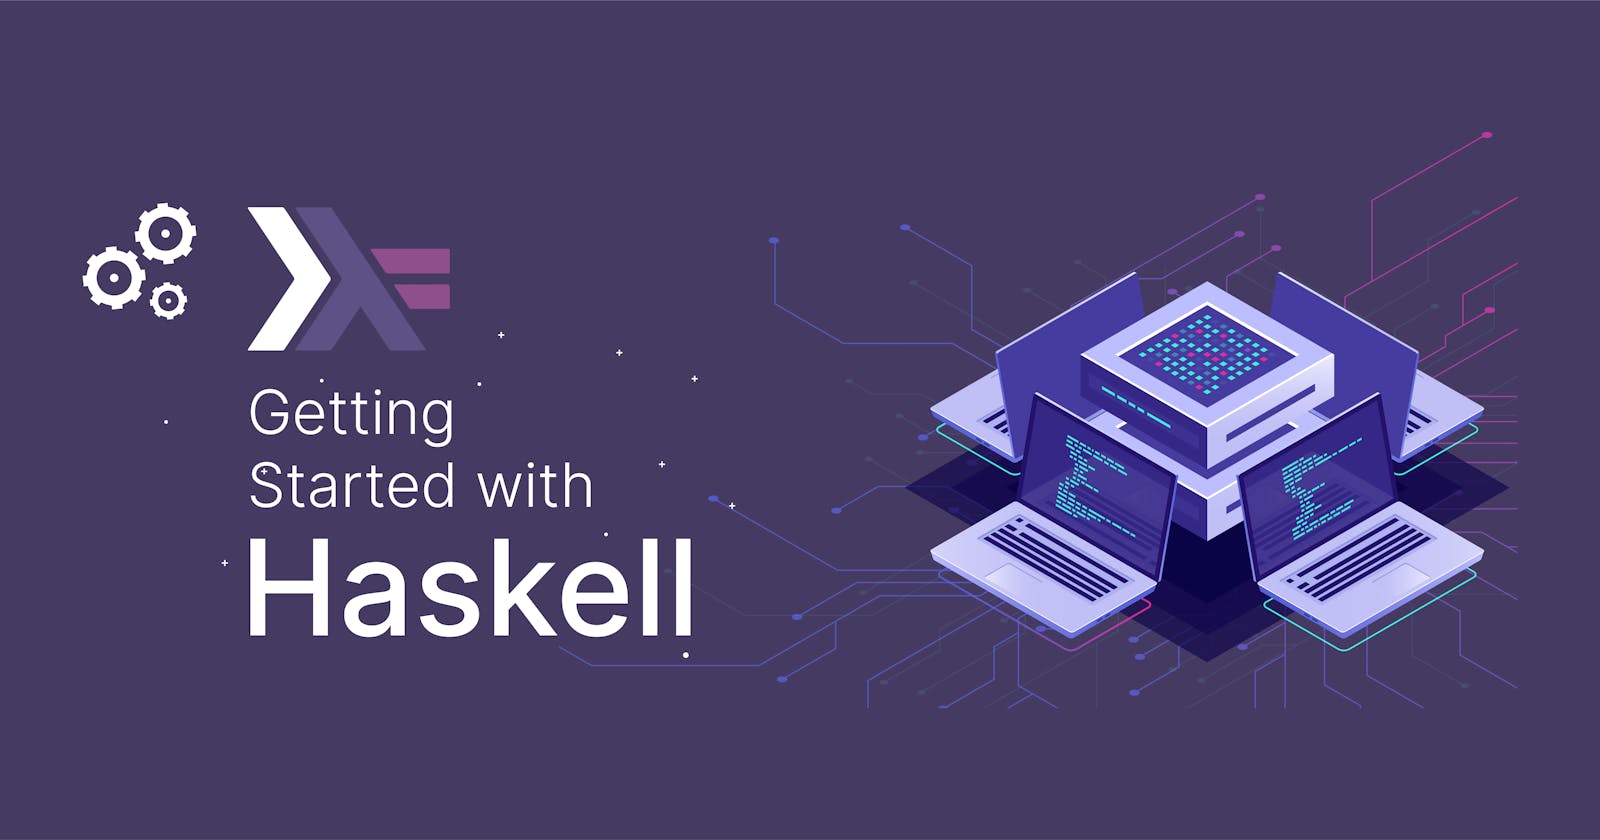 Getting Started with Haskell